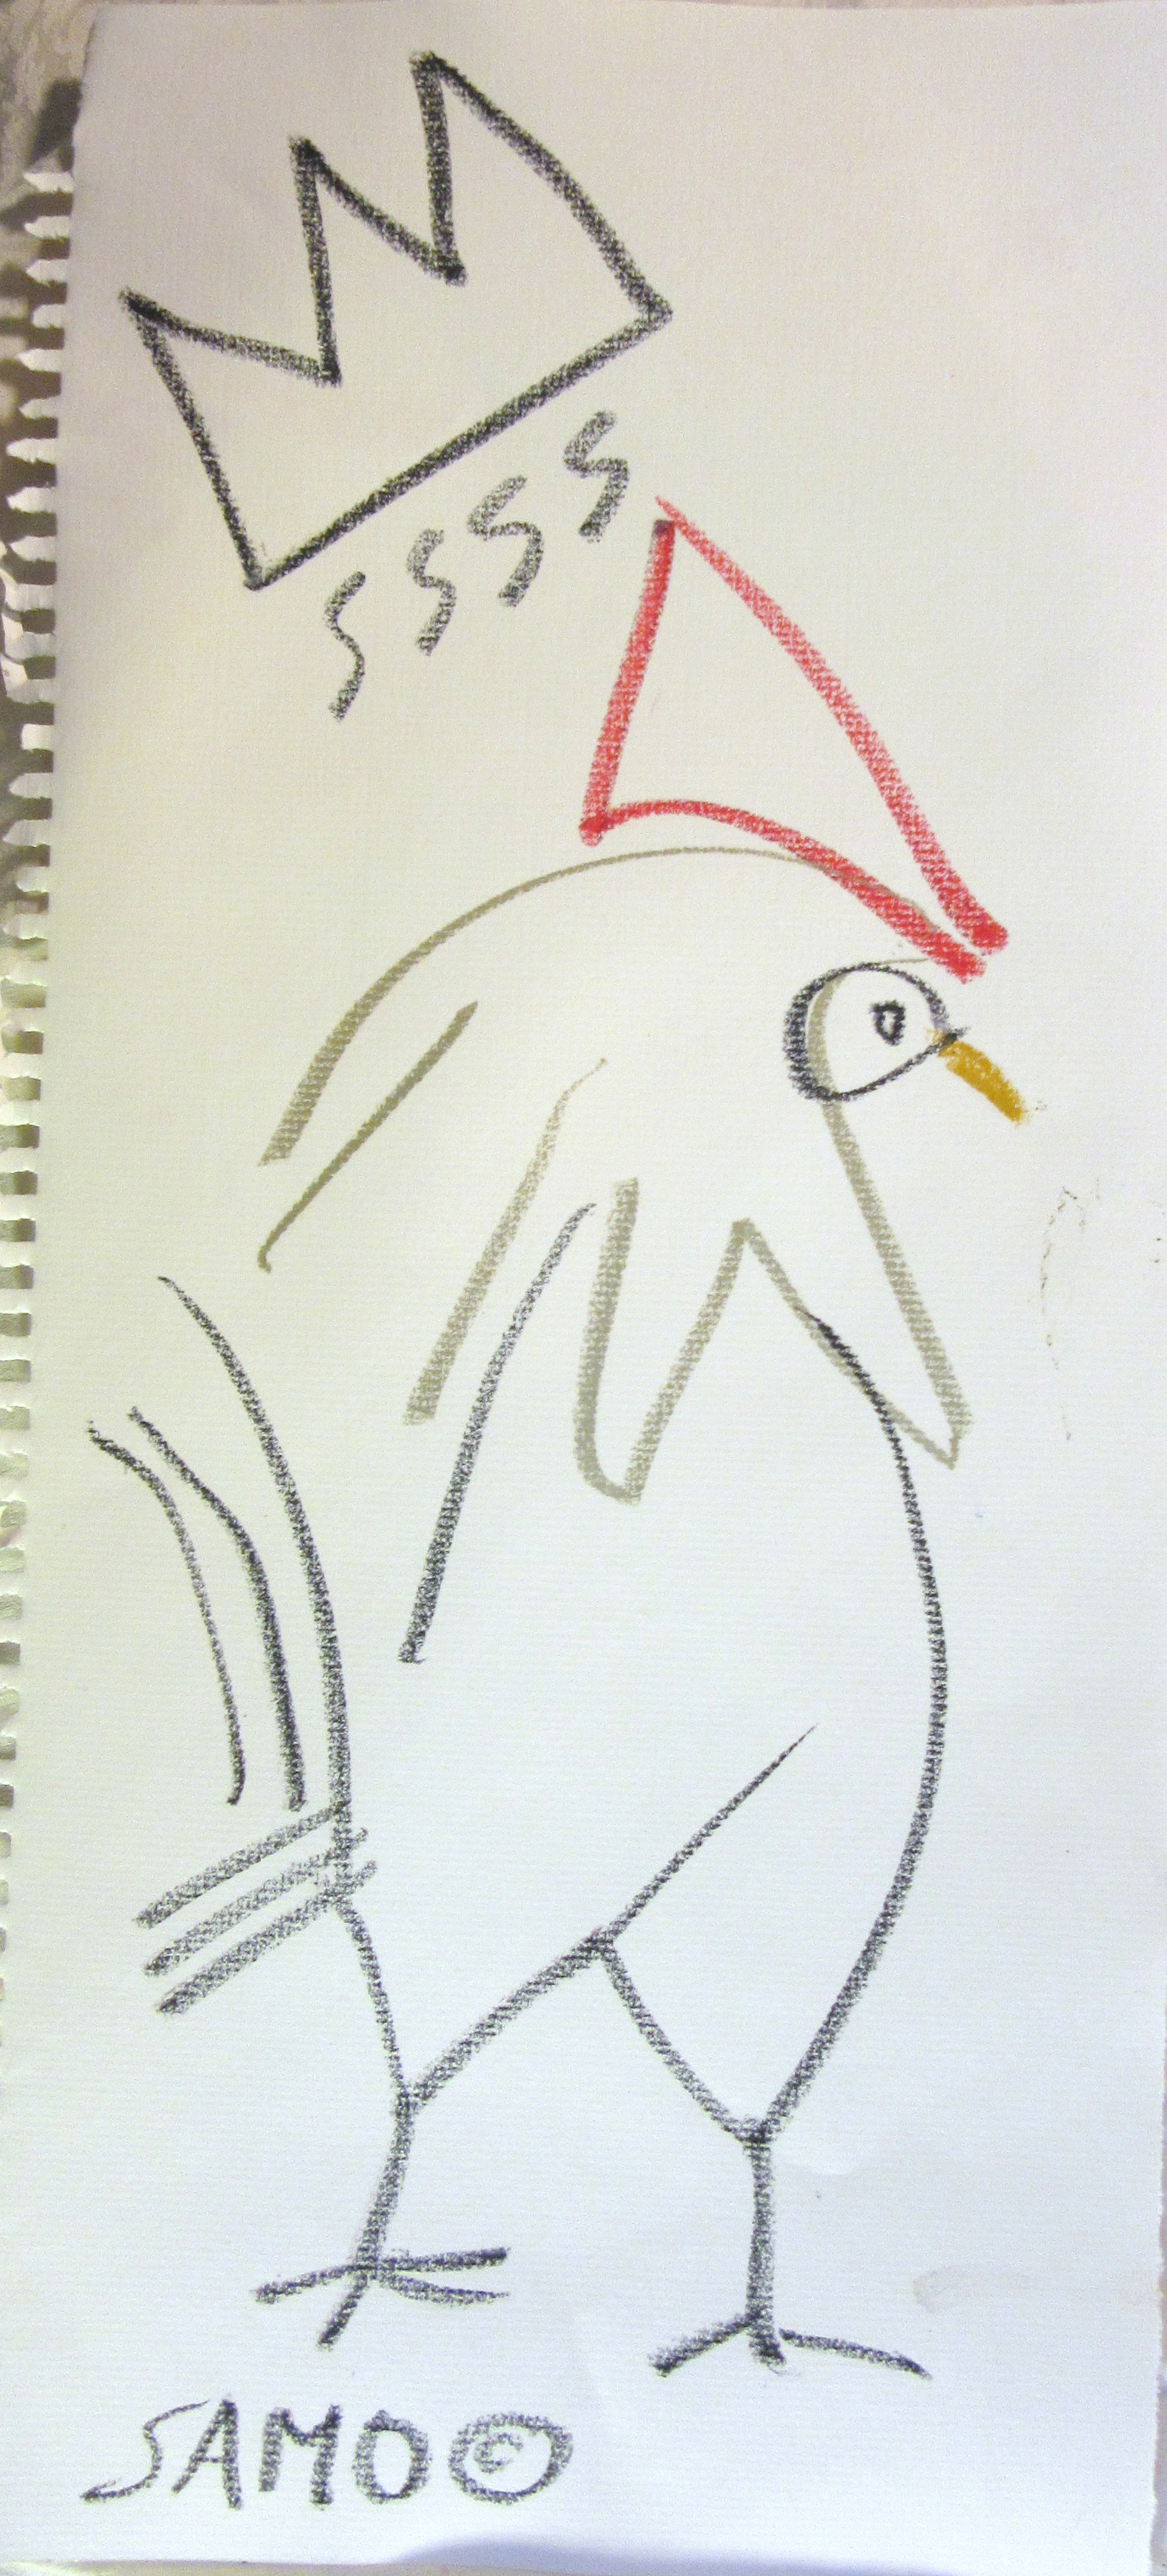 ROOSTER DRAWING
18in x 8in
Oil Stick on Paper
(Forensic analysis dates piece as "more than 20 yrs old")